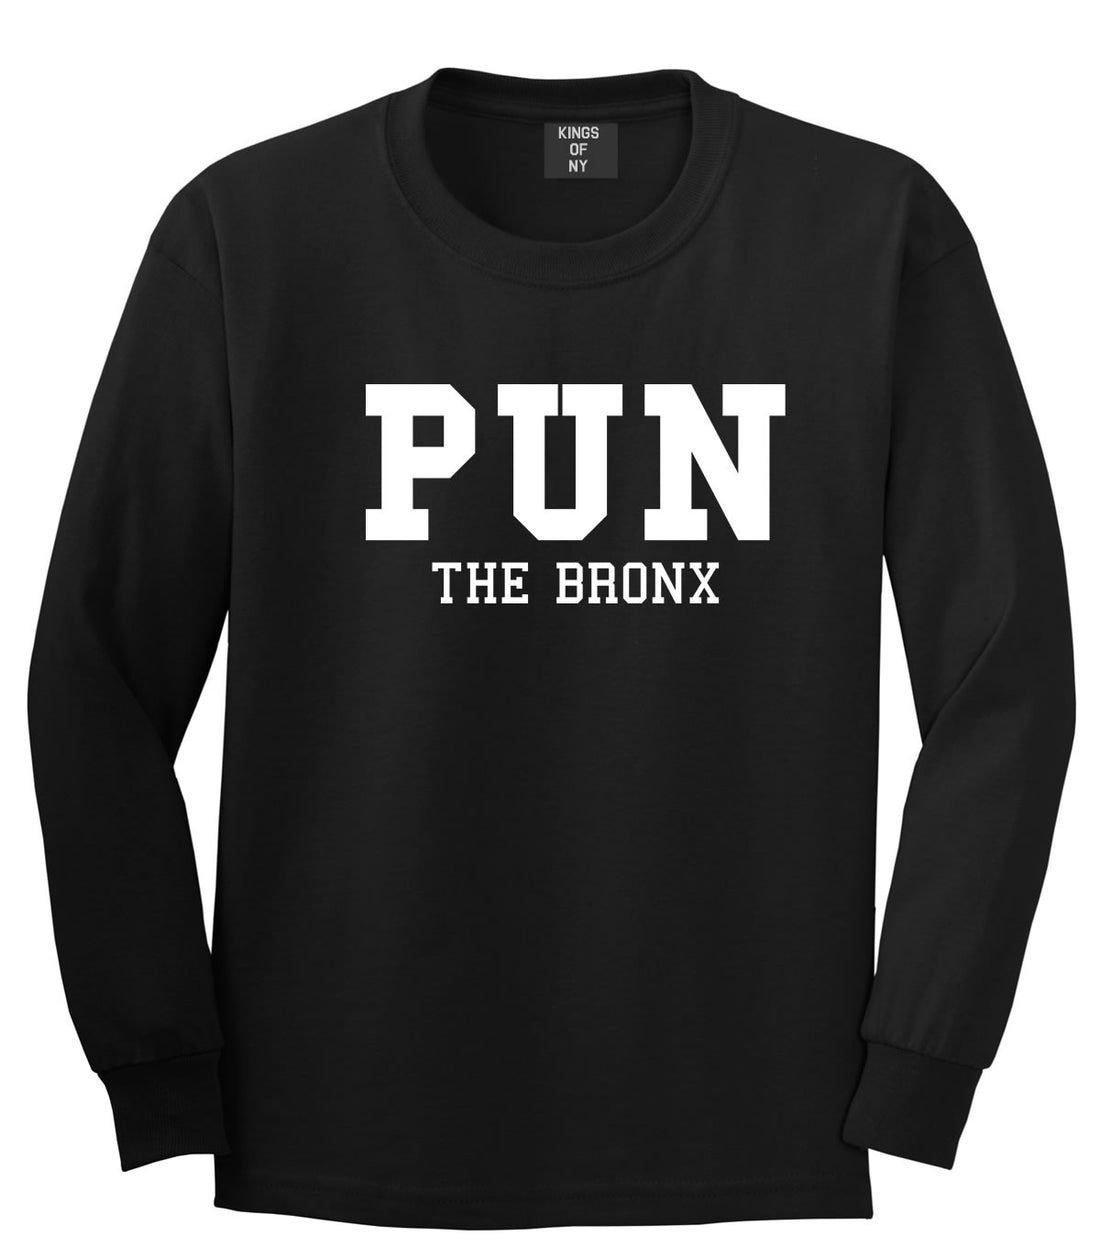 Pun The Bronx Long Sleeve T-Shirt in Black by Kings Of NY